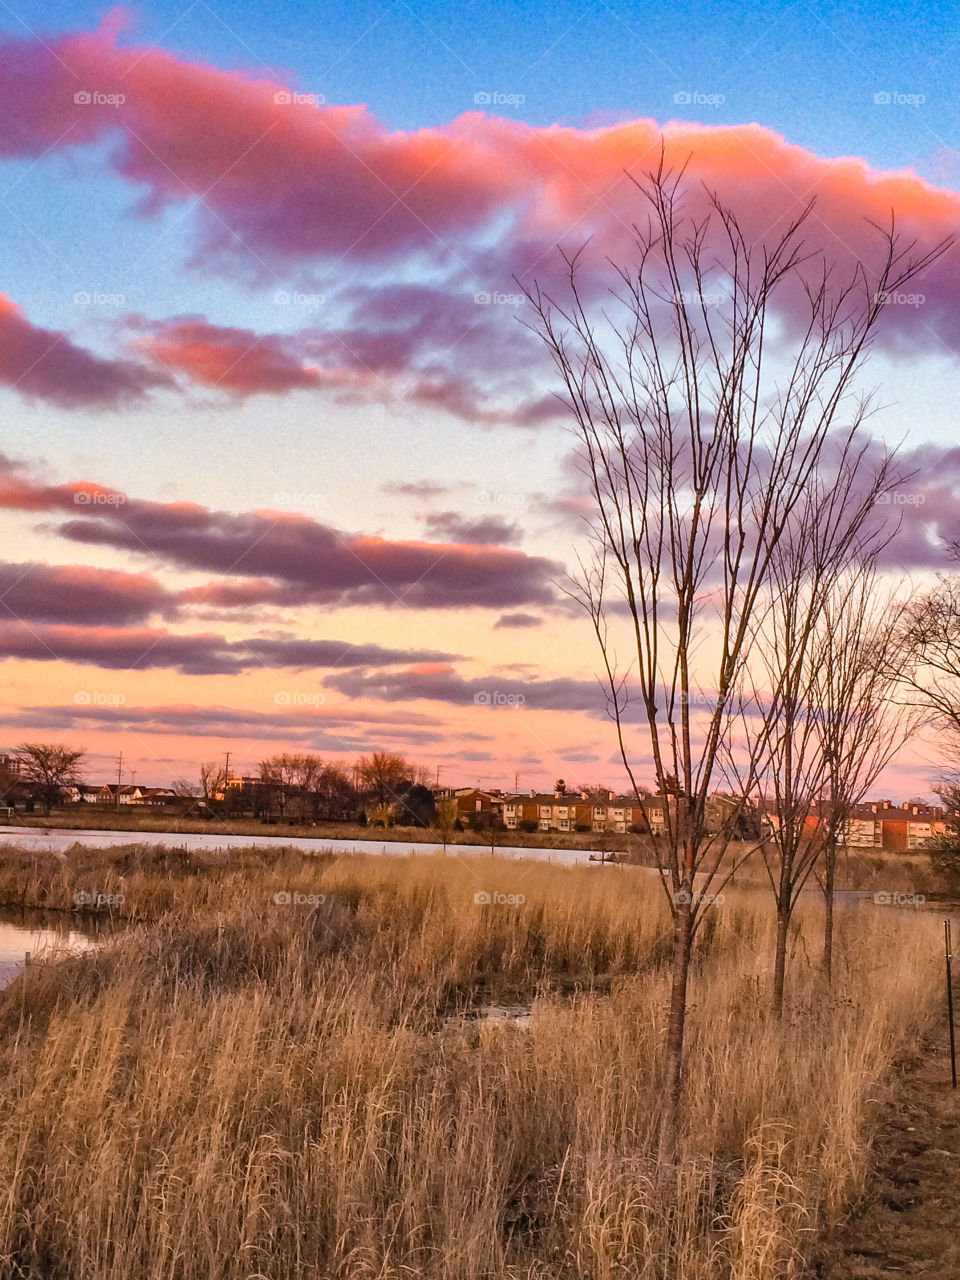 Colorful sky over a prairie with a lake in the distance, skinny leafless trees line the pathway on the other side. Winter’s end is near 